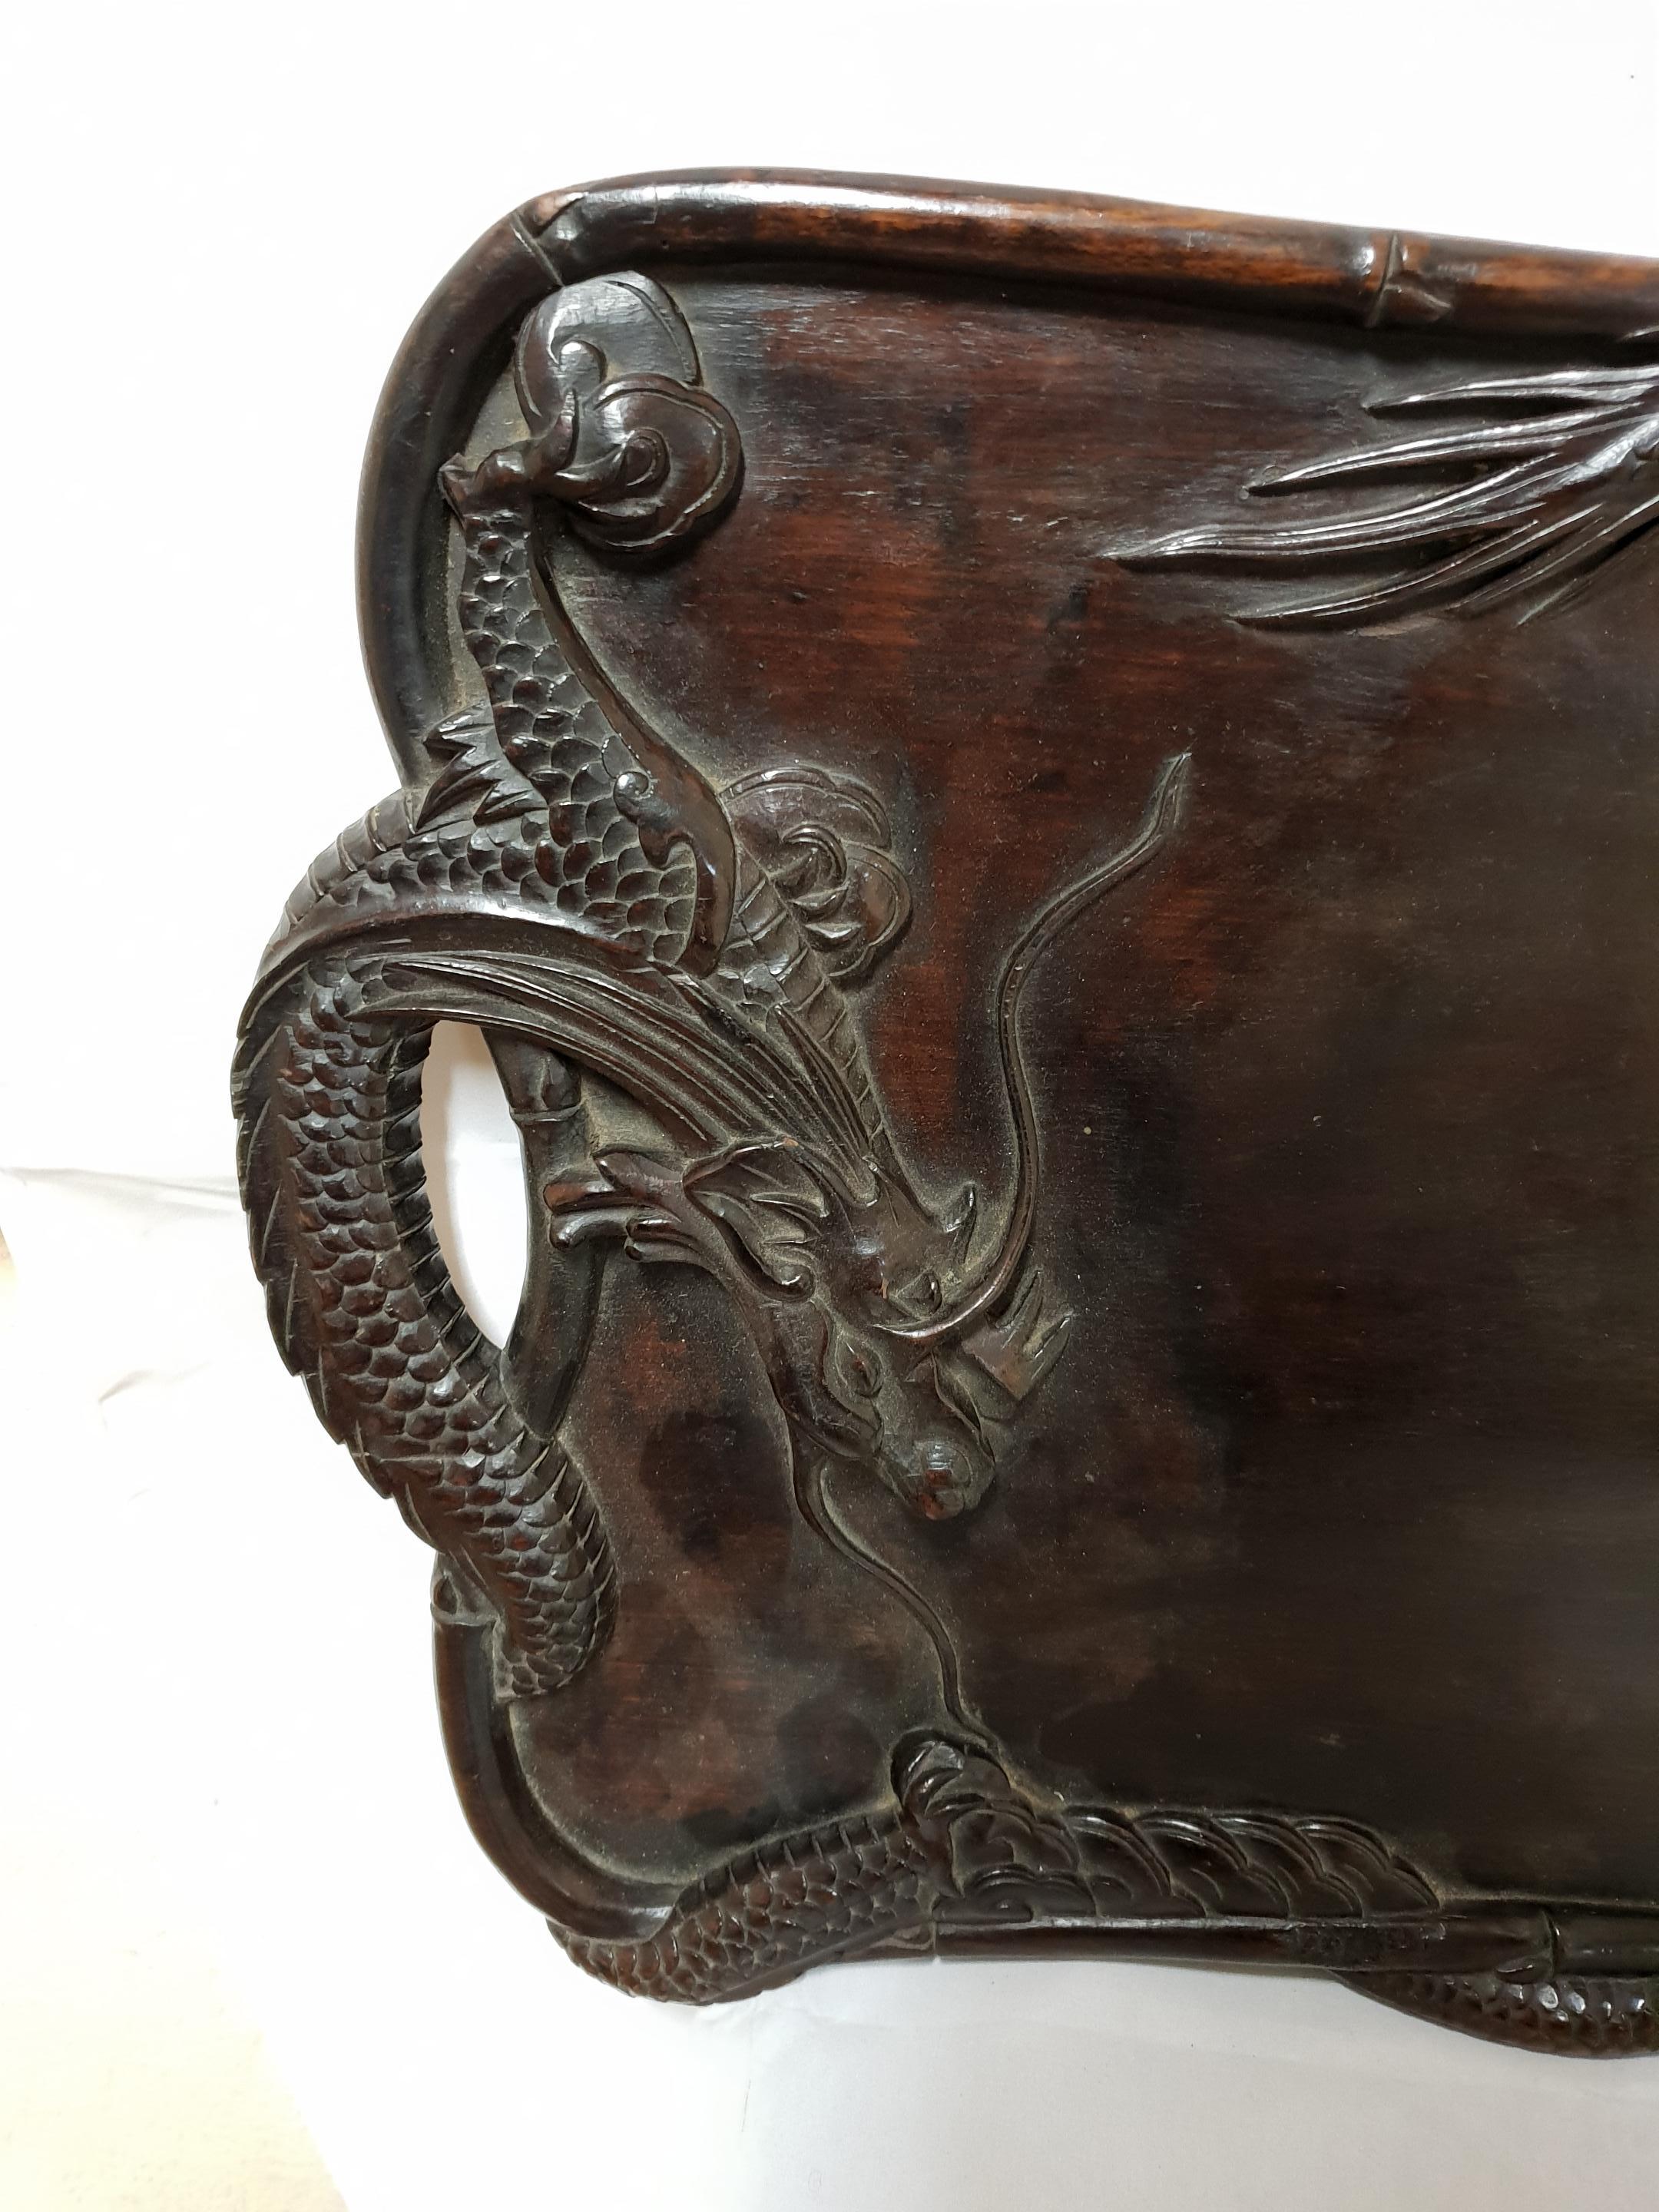 Qing Dynasty Chinese Hardwood Tray with Dragons, 1900s (Chinesisch)